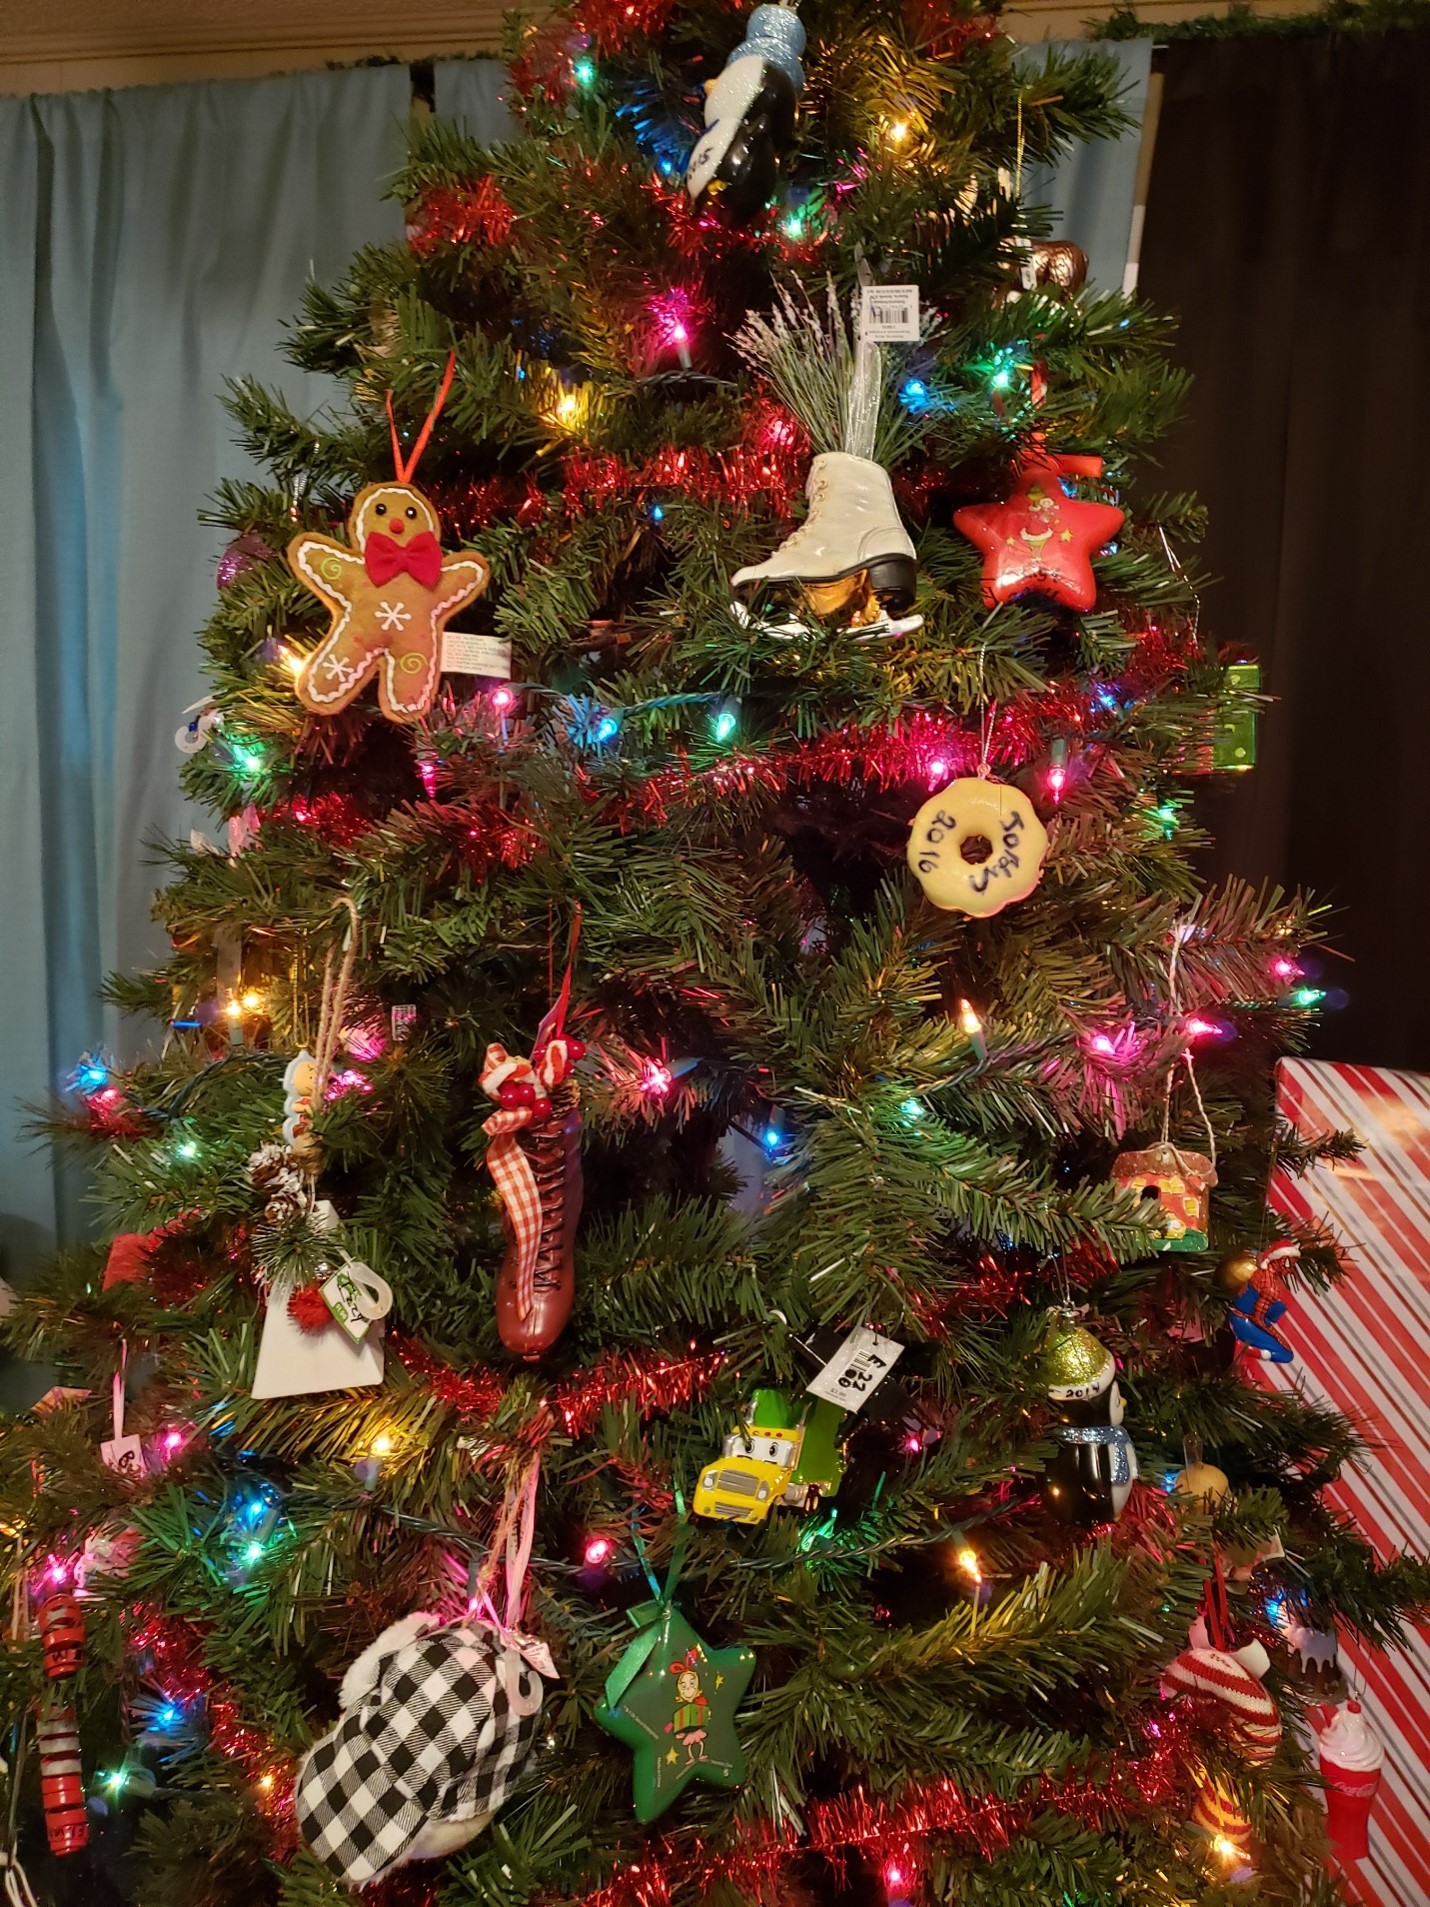 Five Frugal Christmas Traditions for Family